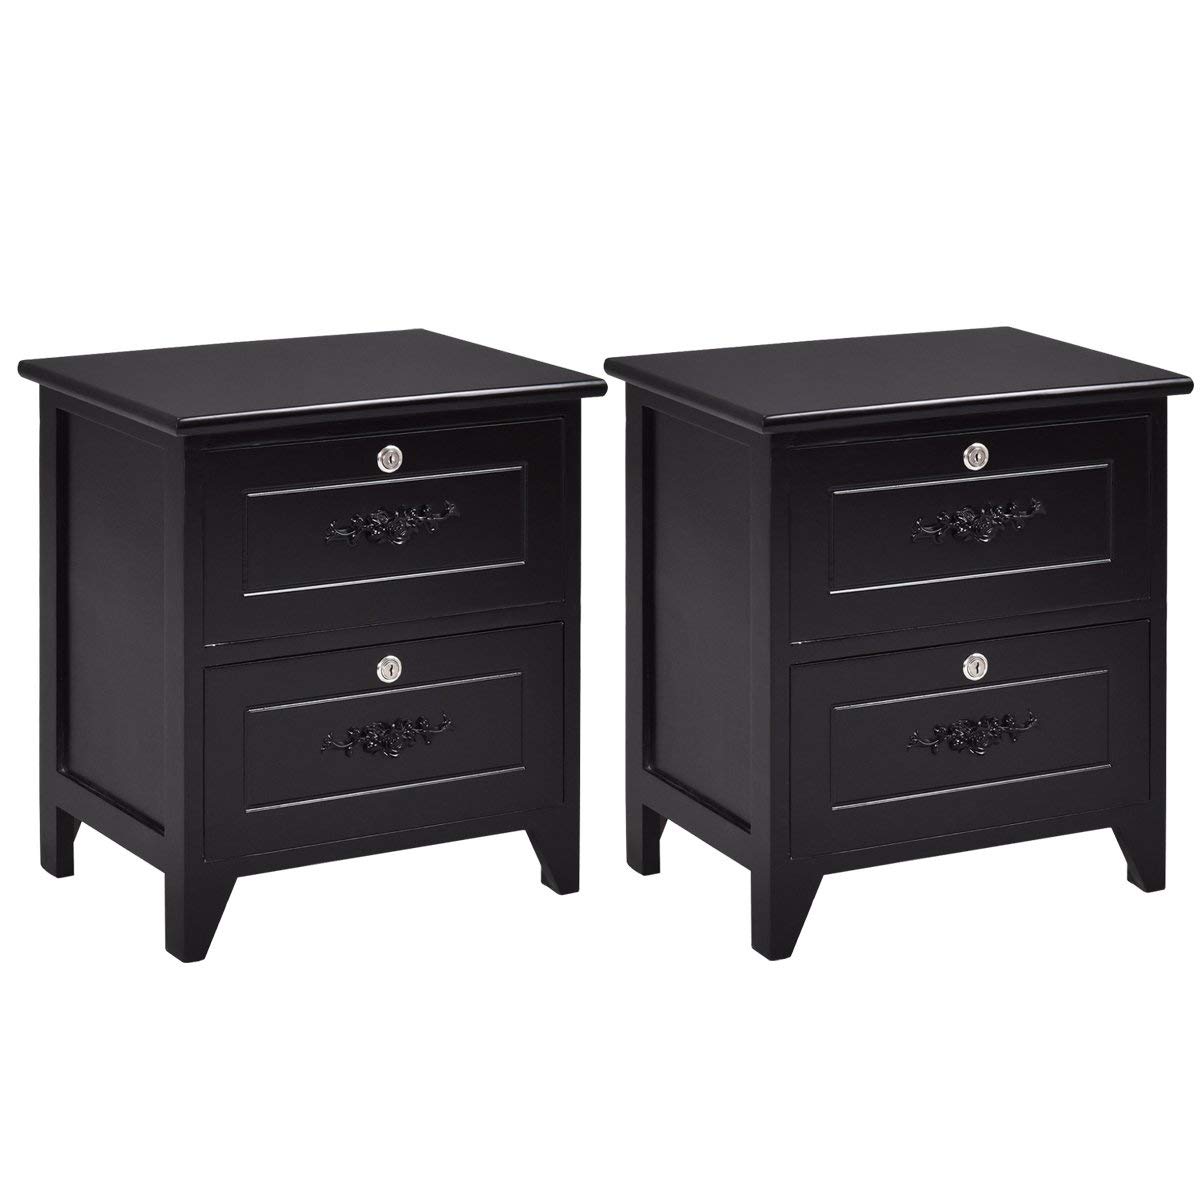 giantex wooden nightstand locking drawers and timmy accent table black handles good storage organize function solid structure for living room bedroom beside sofa side end kitchen